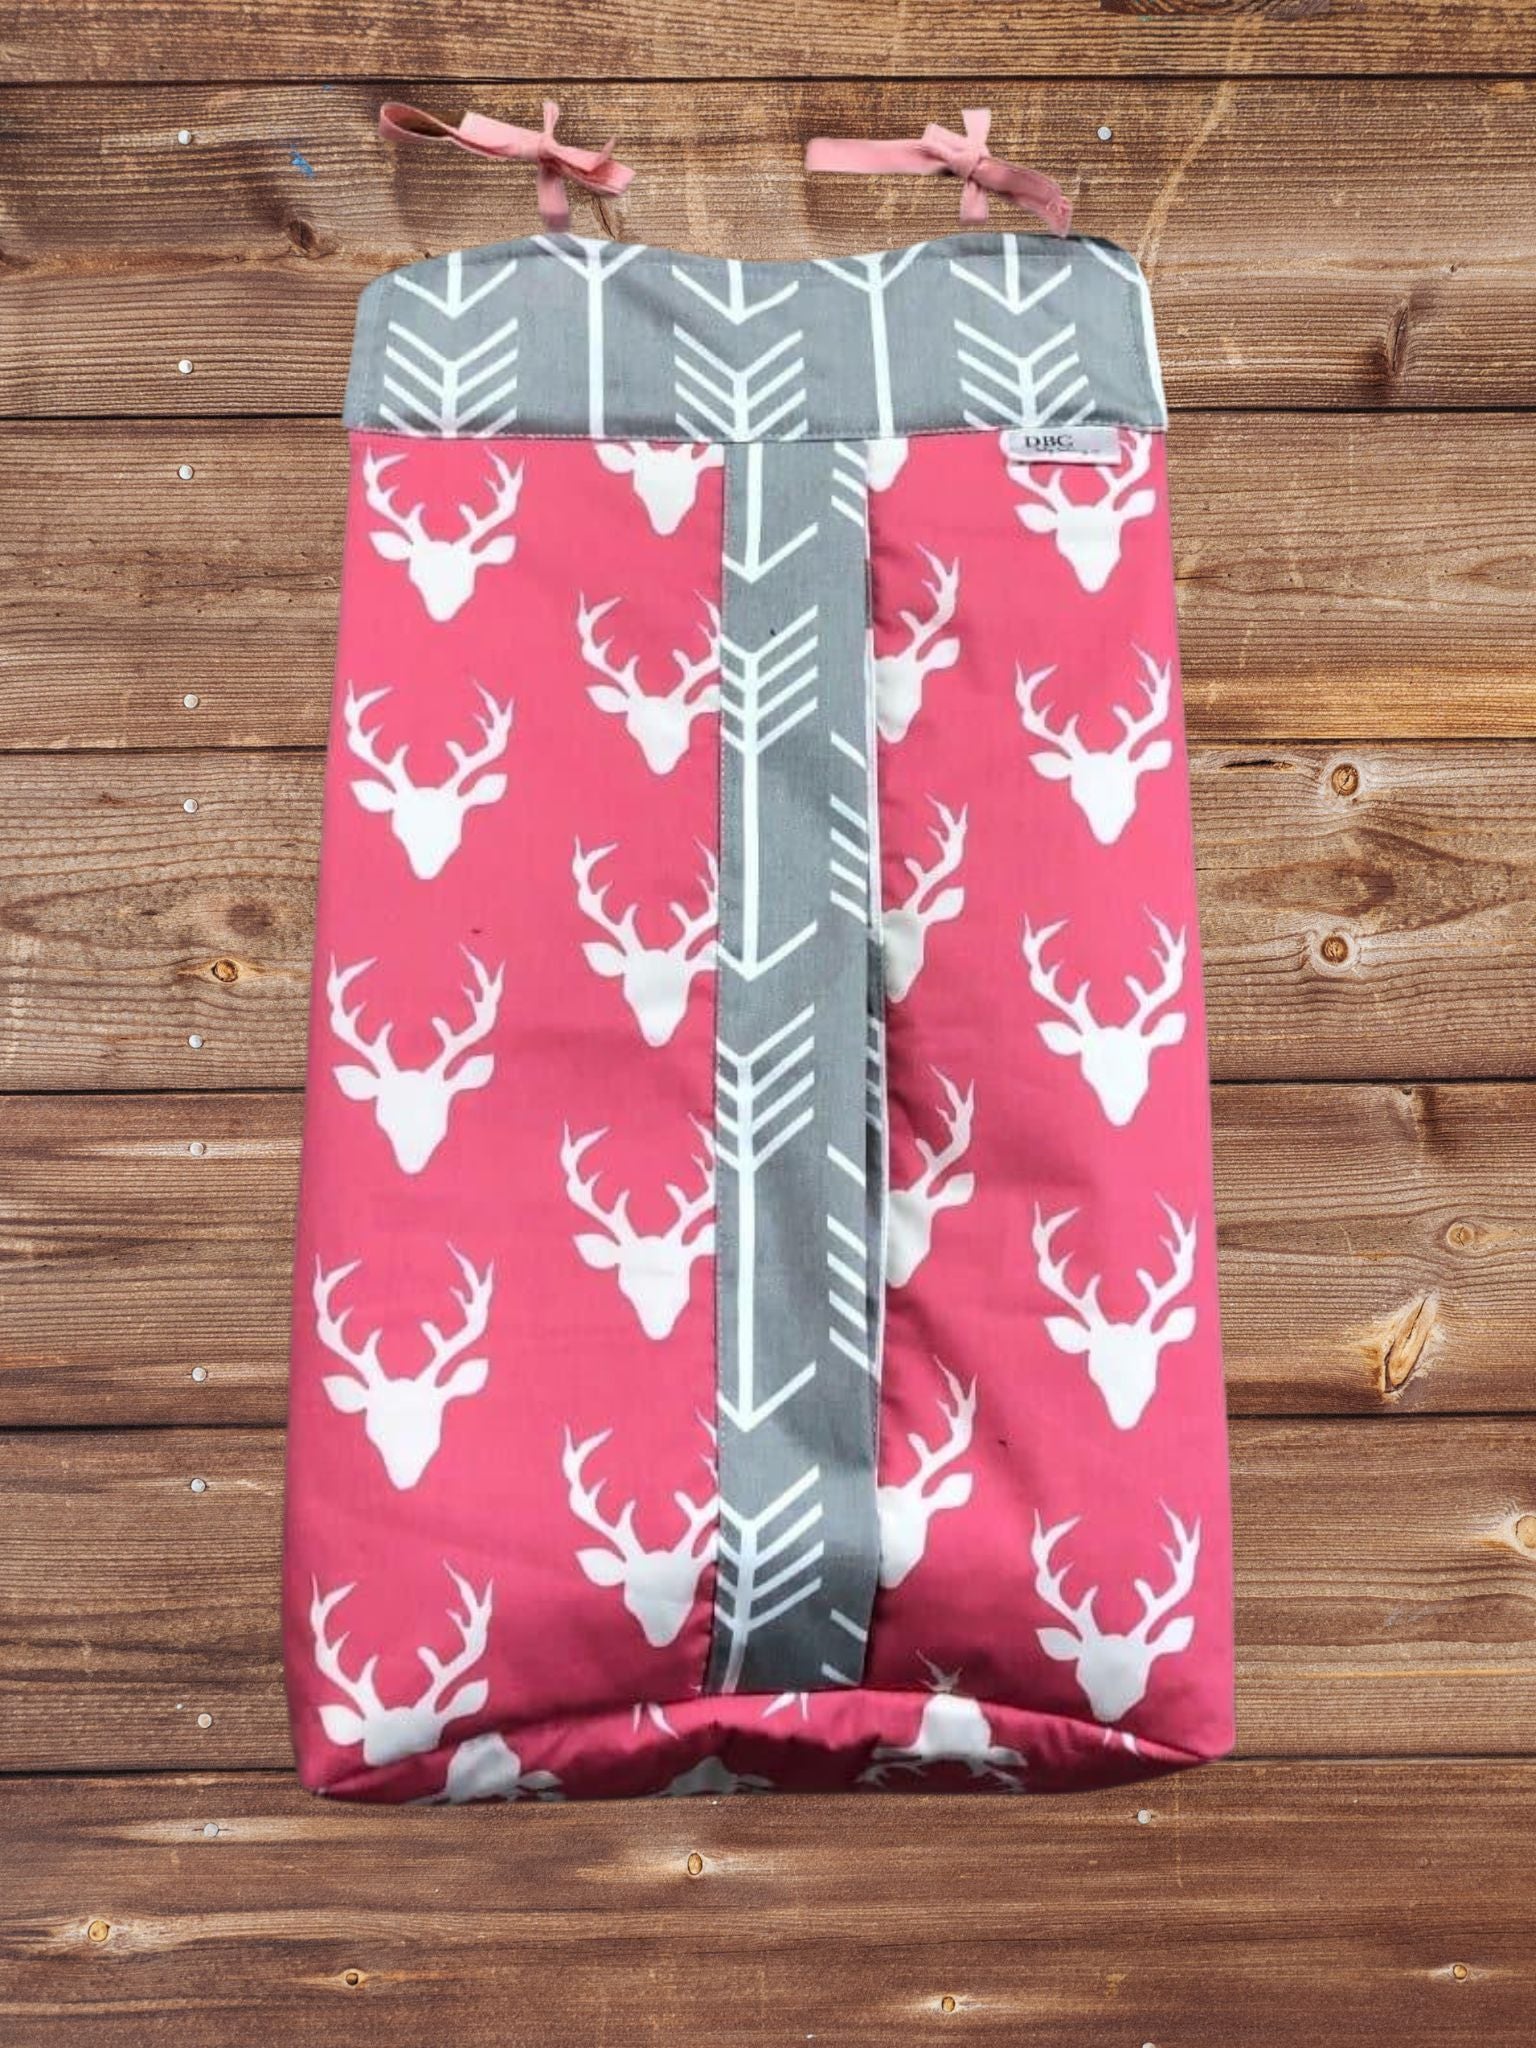 Diaper stacker - Pink Buck with Gray Arrow Trim Woodland Diaper Stacker - DBC Baby Bedding Co 